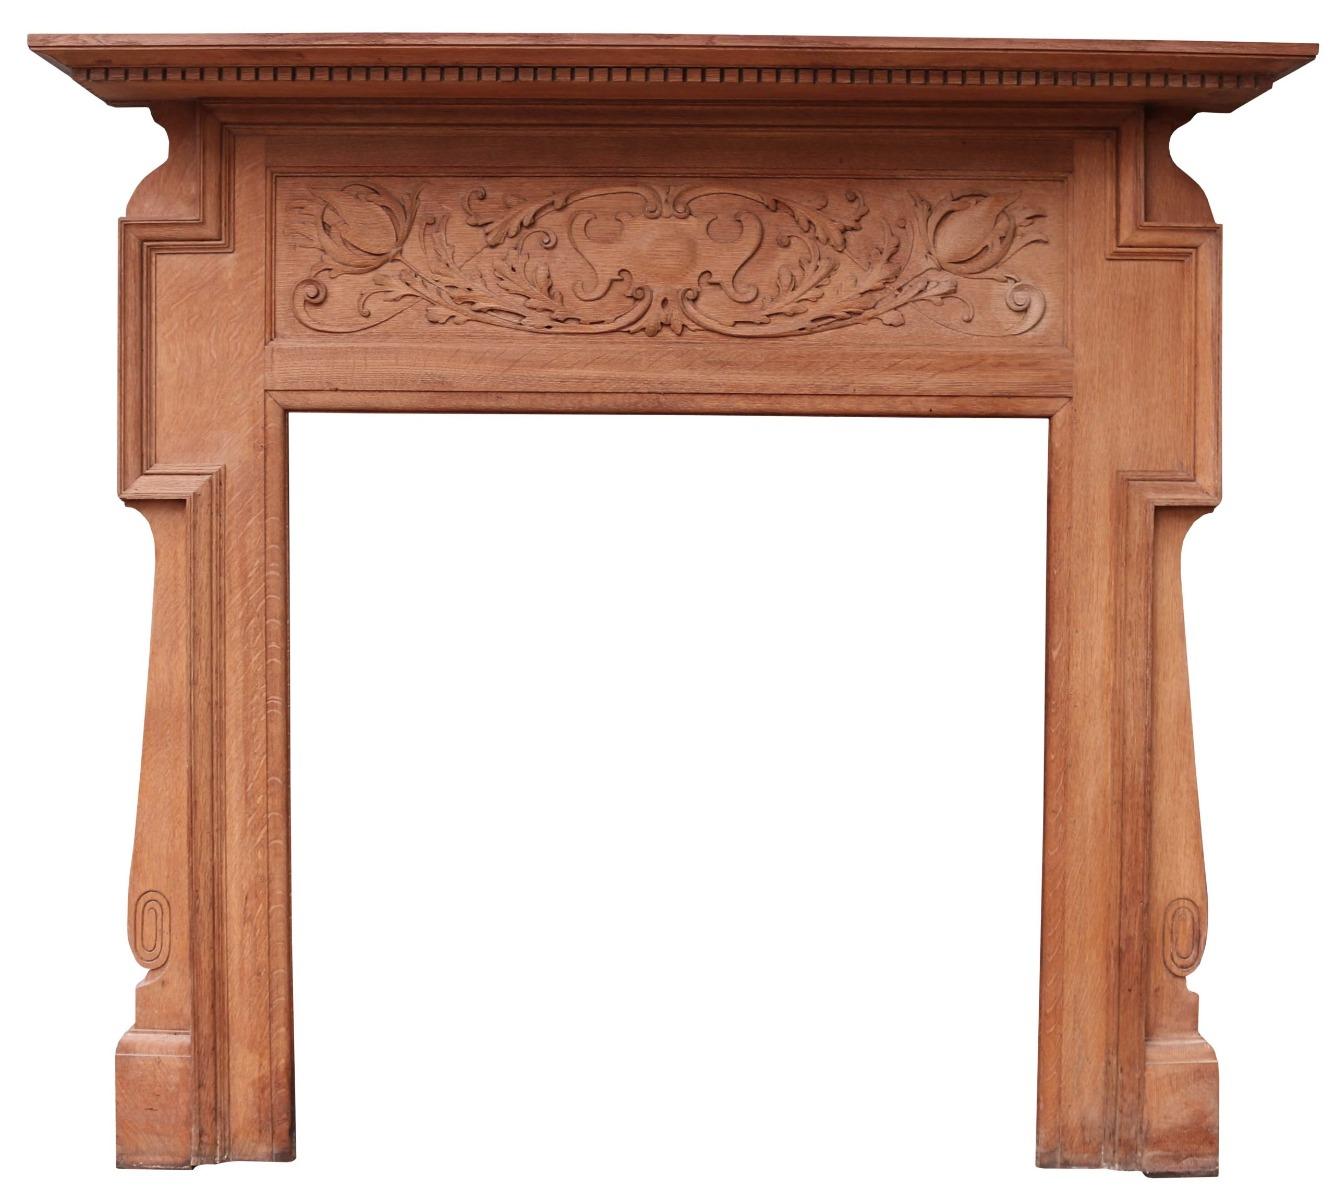 An English Art Nouveau period fireplace with stylised carved floral frieze panel.

Additional Dimensions:

Opening Height 97 cm

Opening Width 95 cm

Width between outside of foot blocks 141 cm.